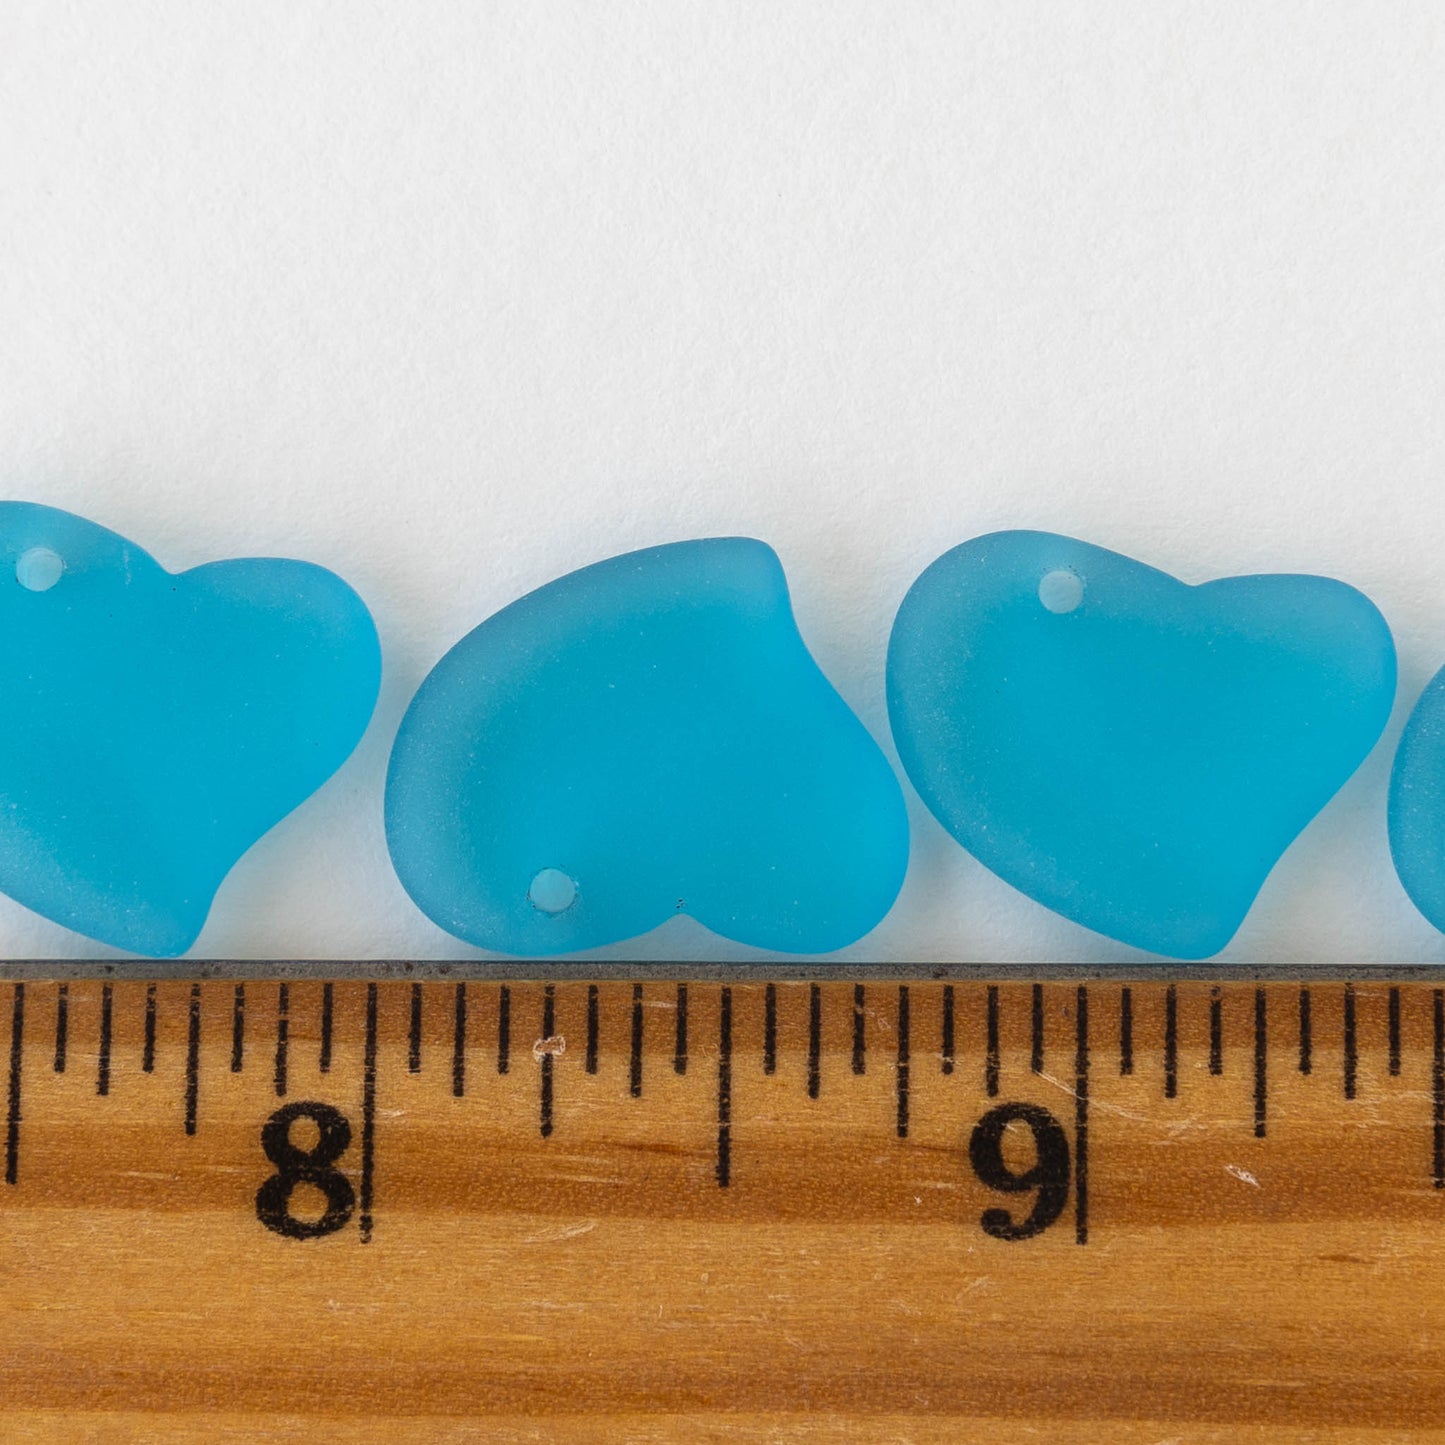 Load image into Gallery viewer, 18mm Frosted Glass Hearts - Aqua - 2 Beads
